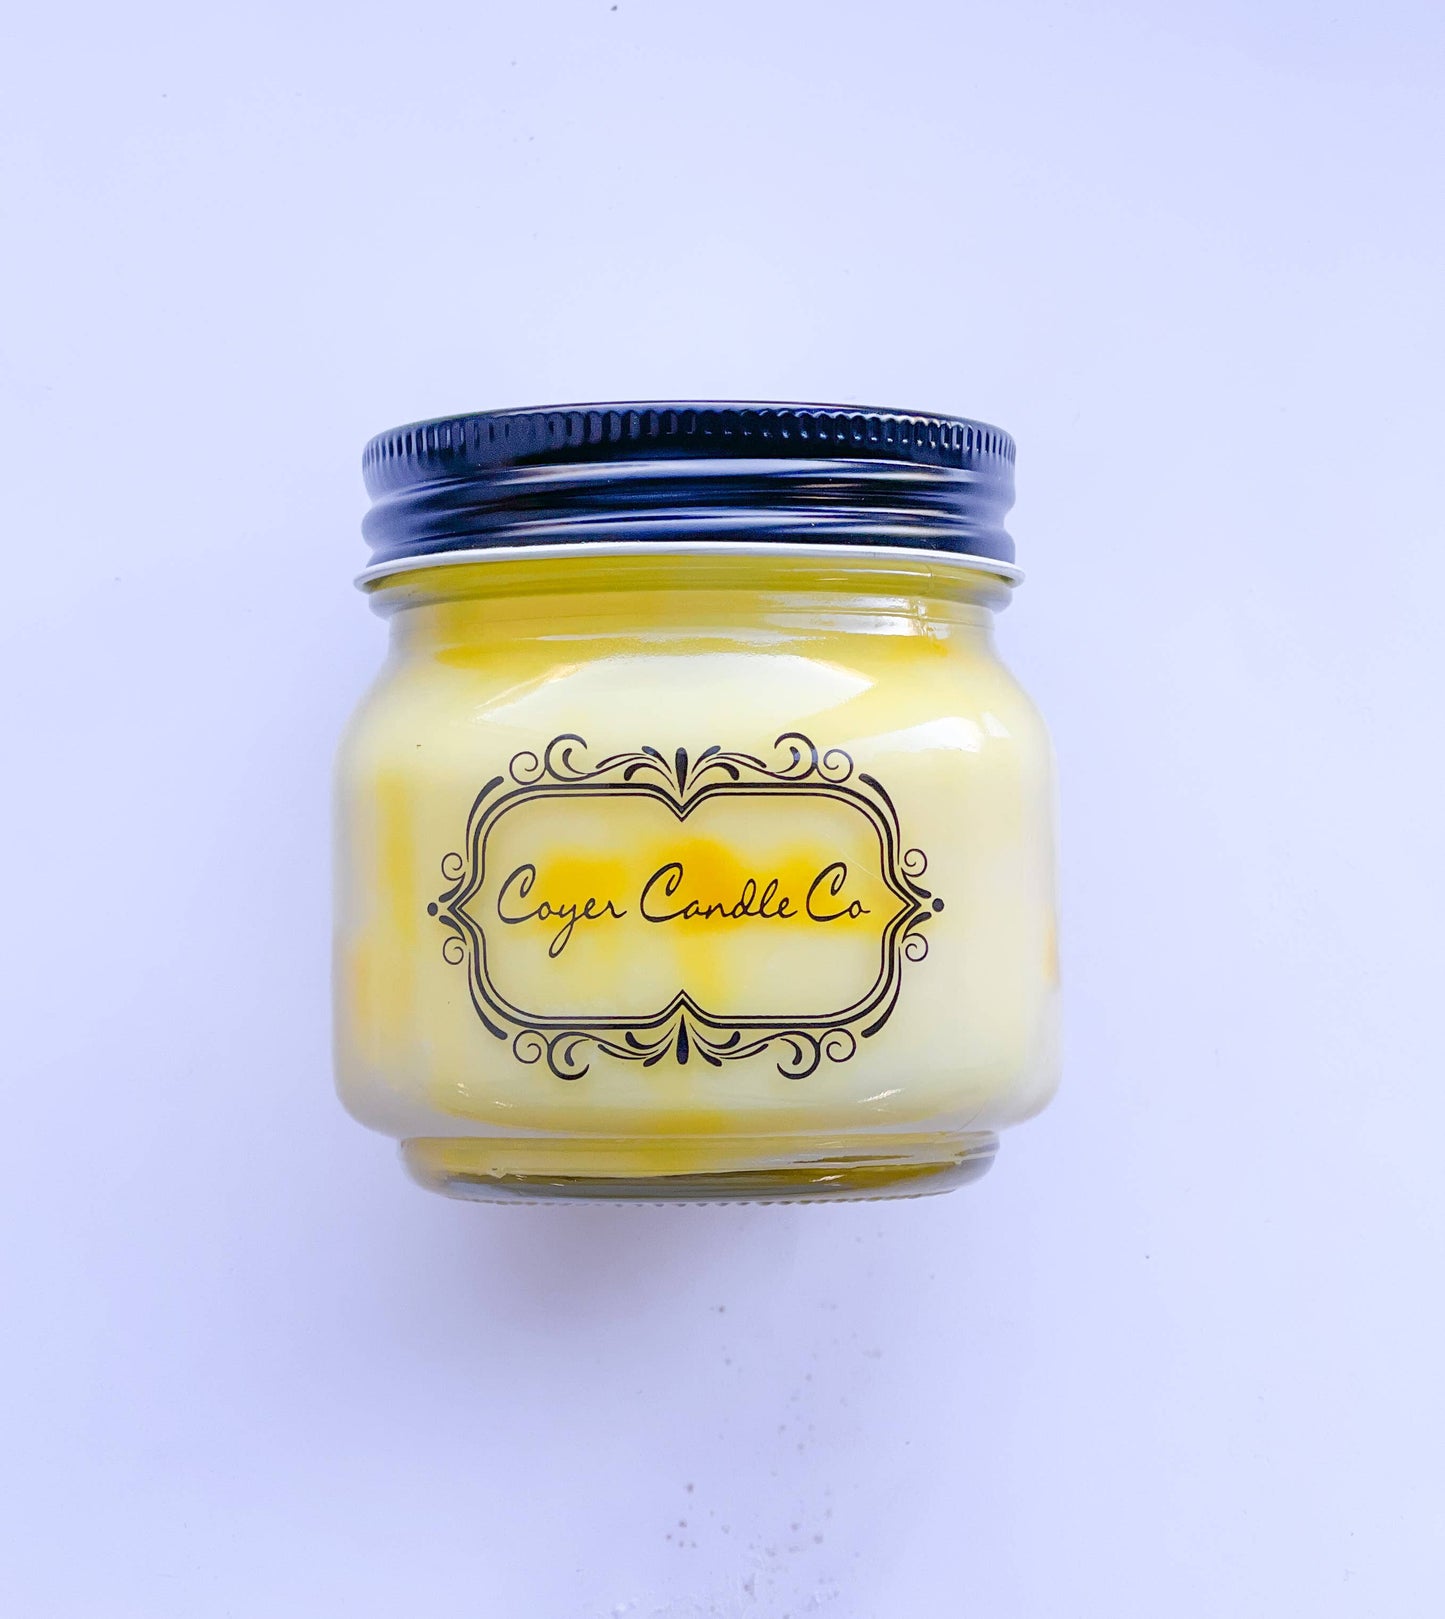 Coyer Candle Co. - 8 oz. Mason Jar Candles - Signature Collection: Choose Happiness